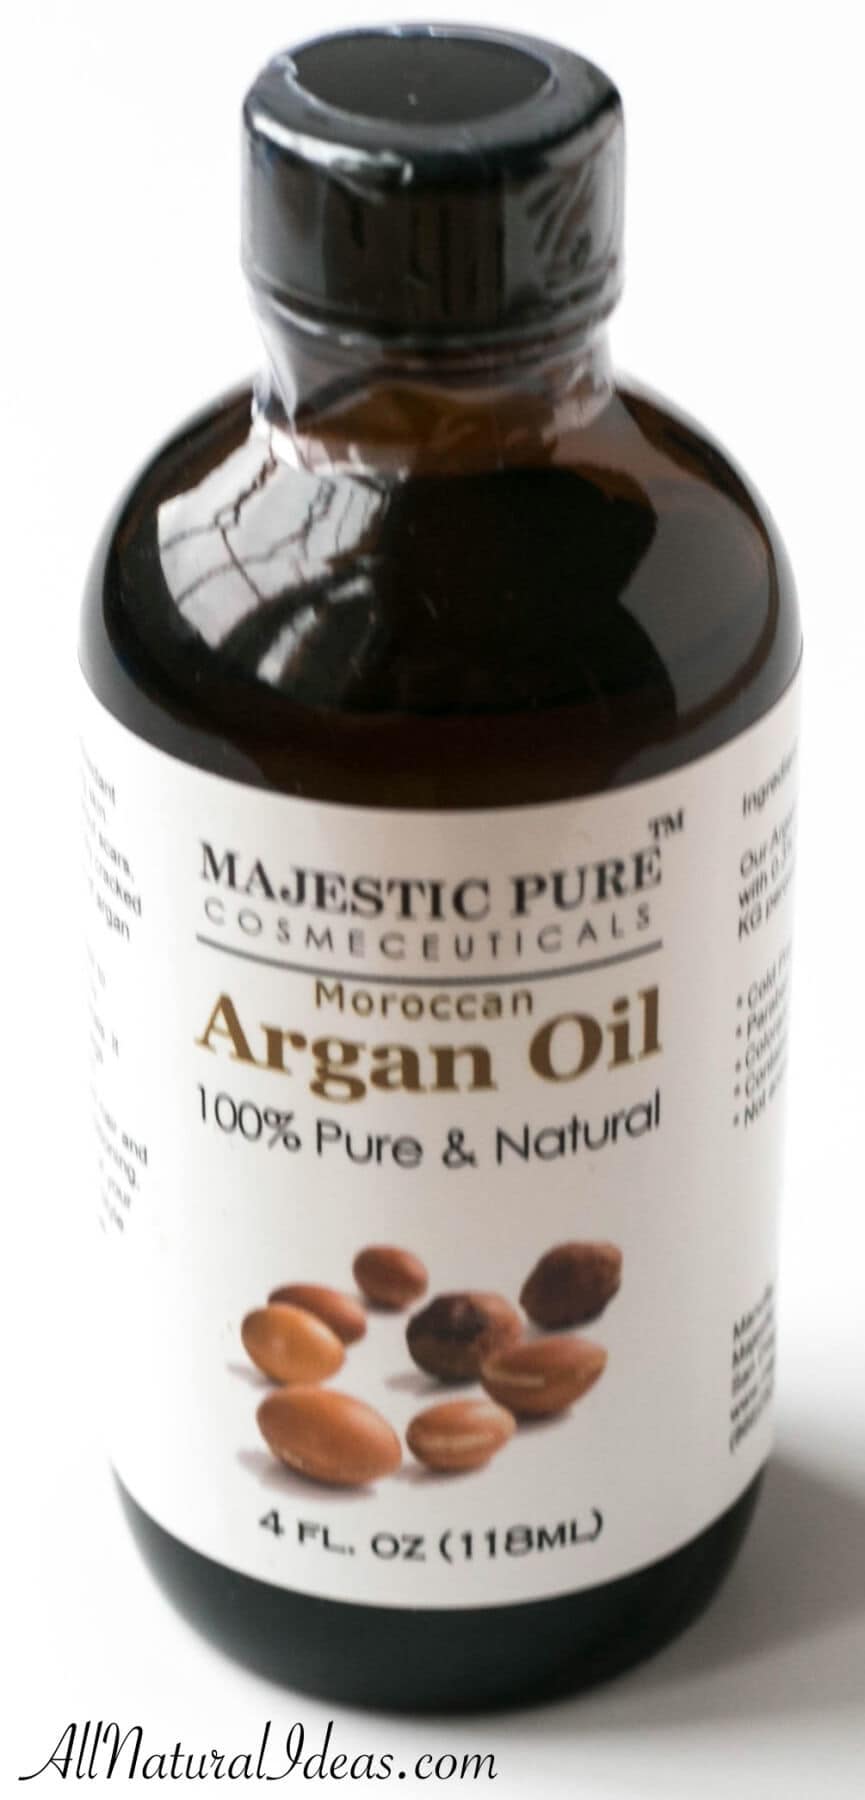 Moroccan argan oil benefits for skin and hair